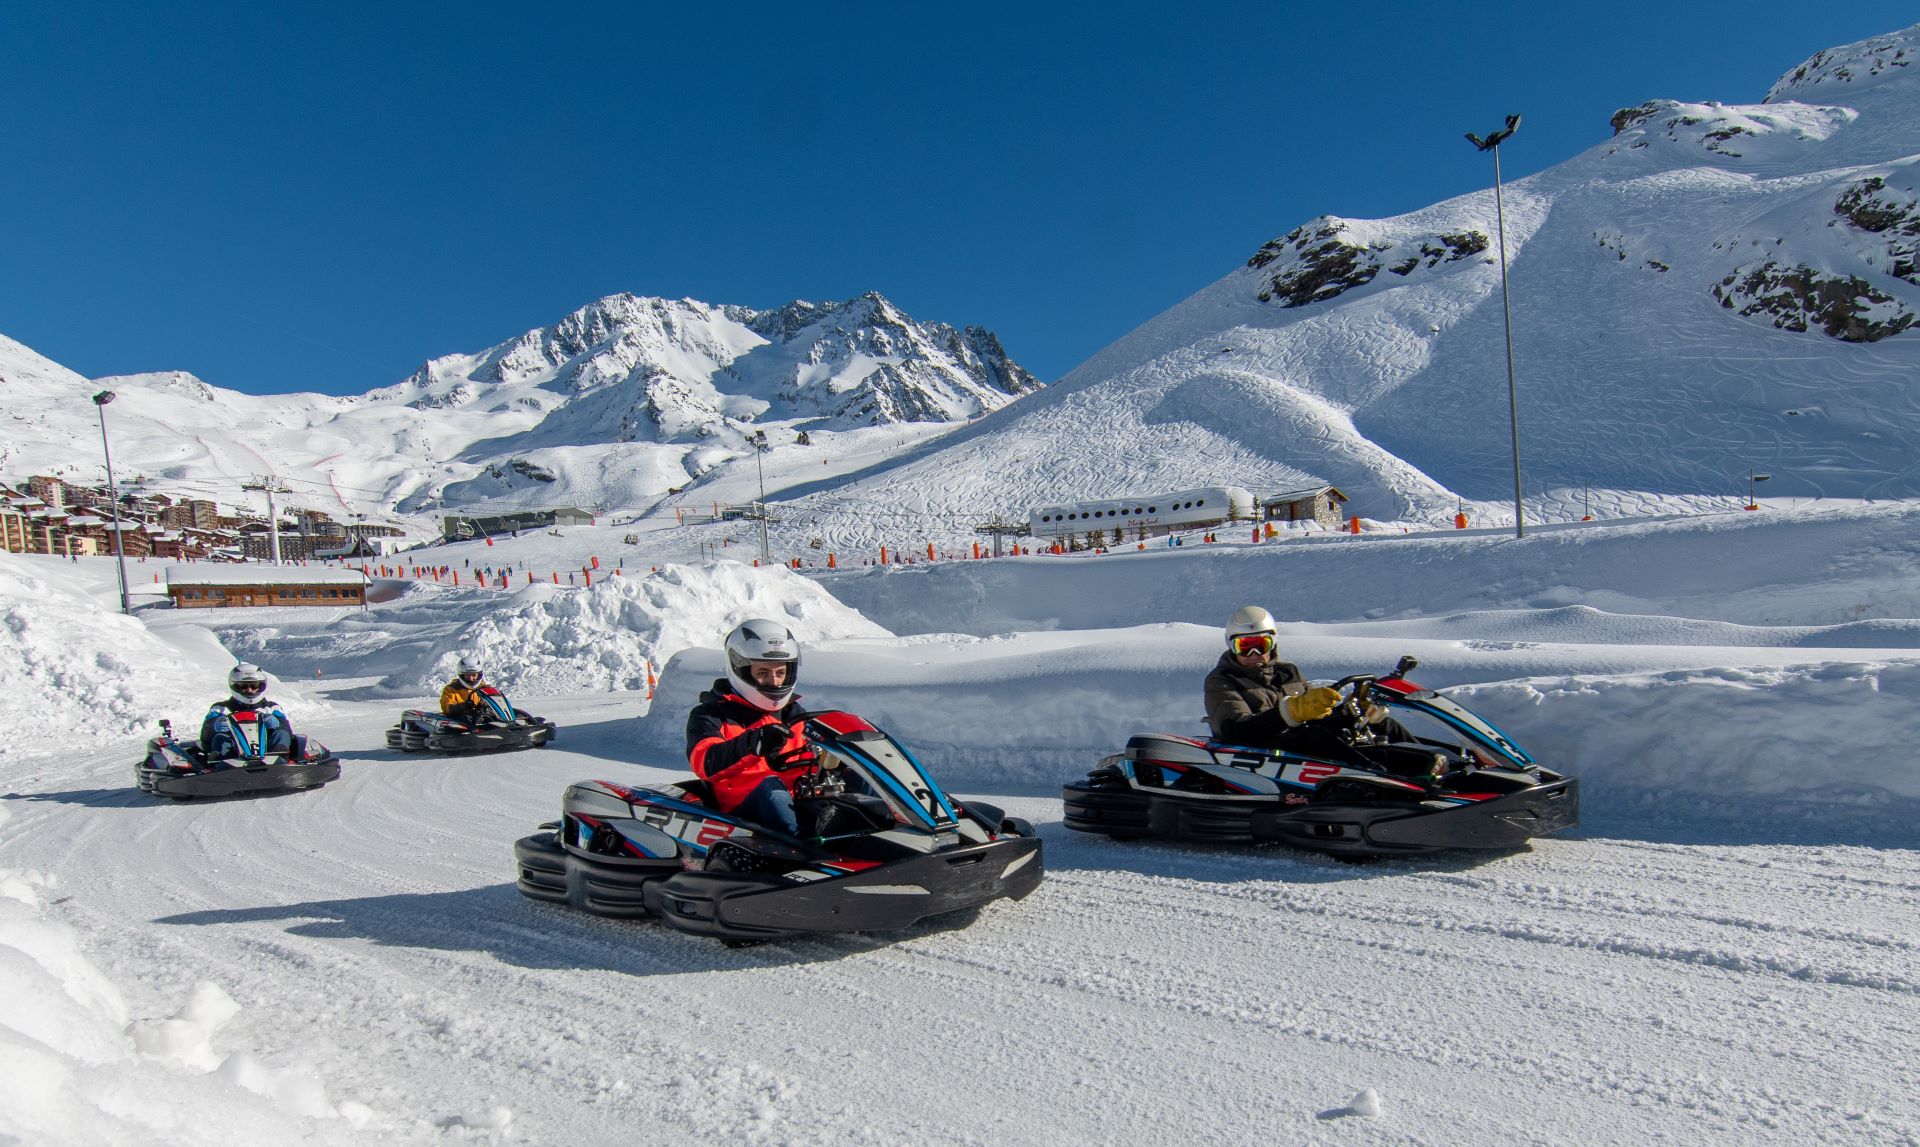 karting-circuit-glace-val-thorens-montagne-hiver-station